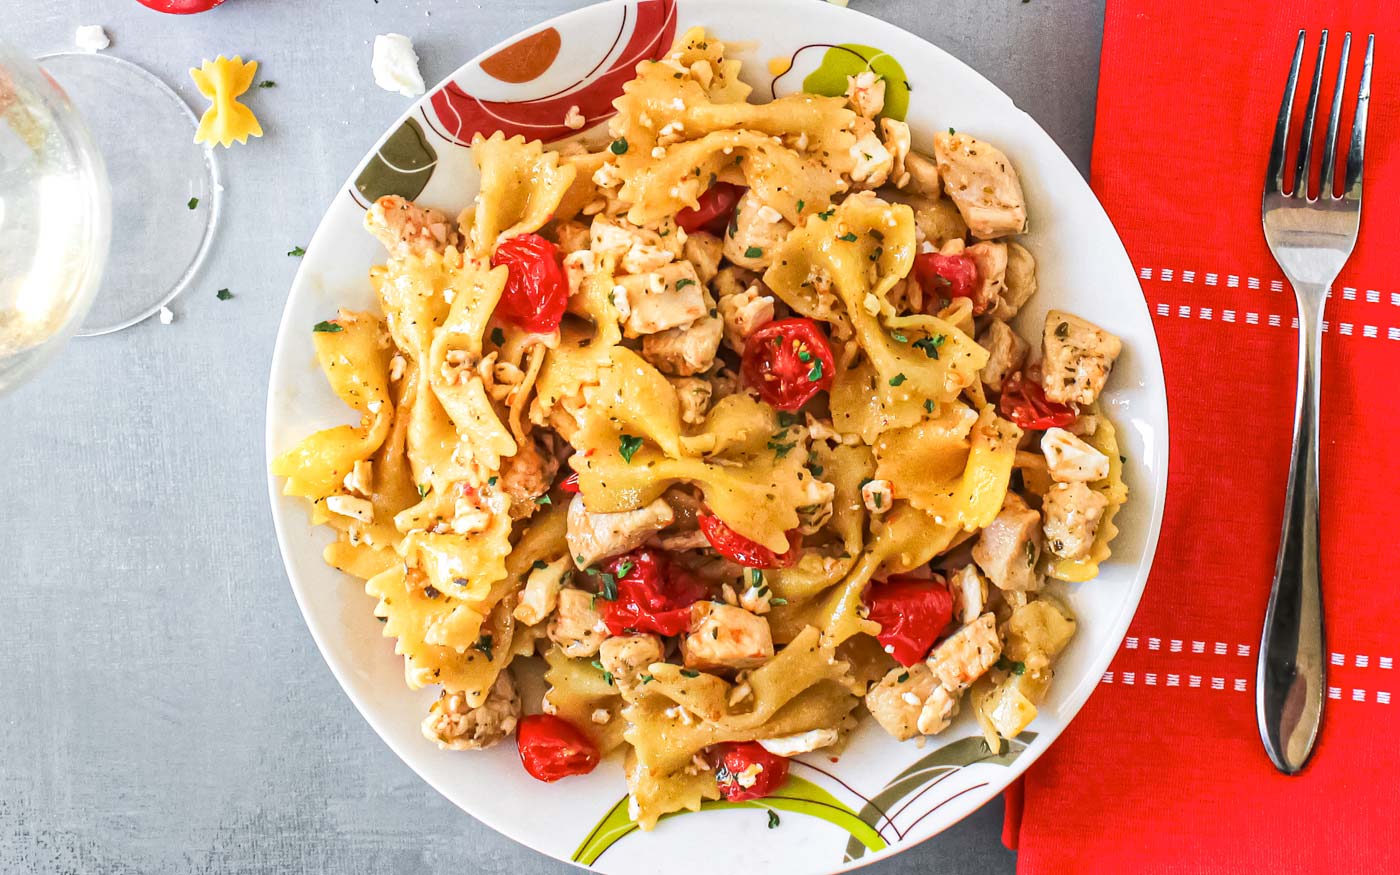 Plate of chicken white wine pasta featuring bowtie pasta, cherry tomatoes and feta cheese crumbles.